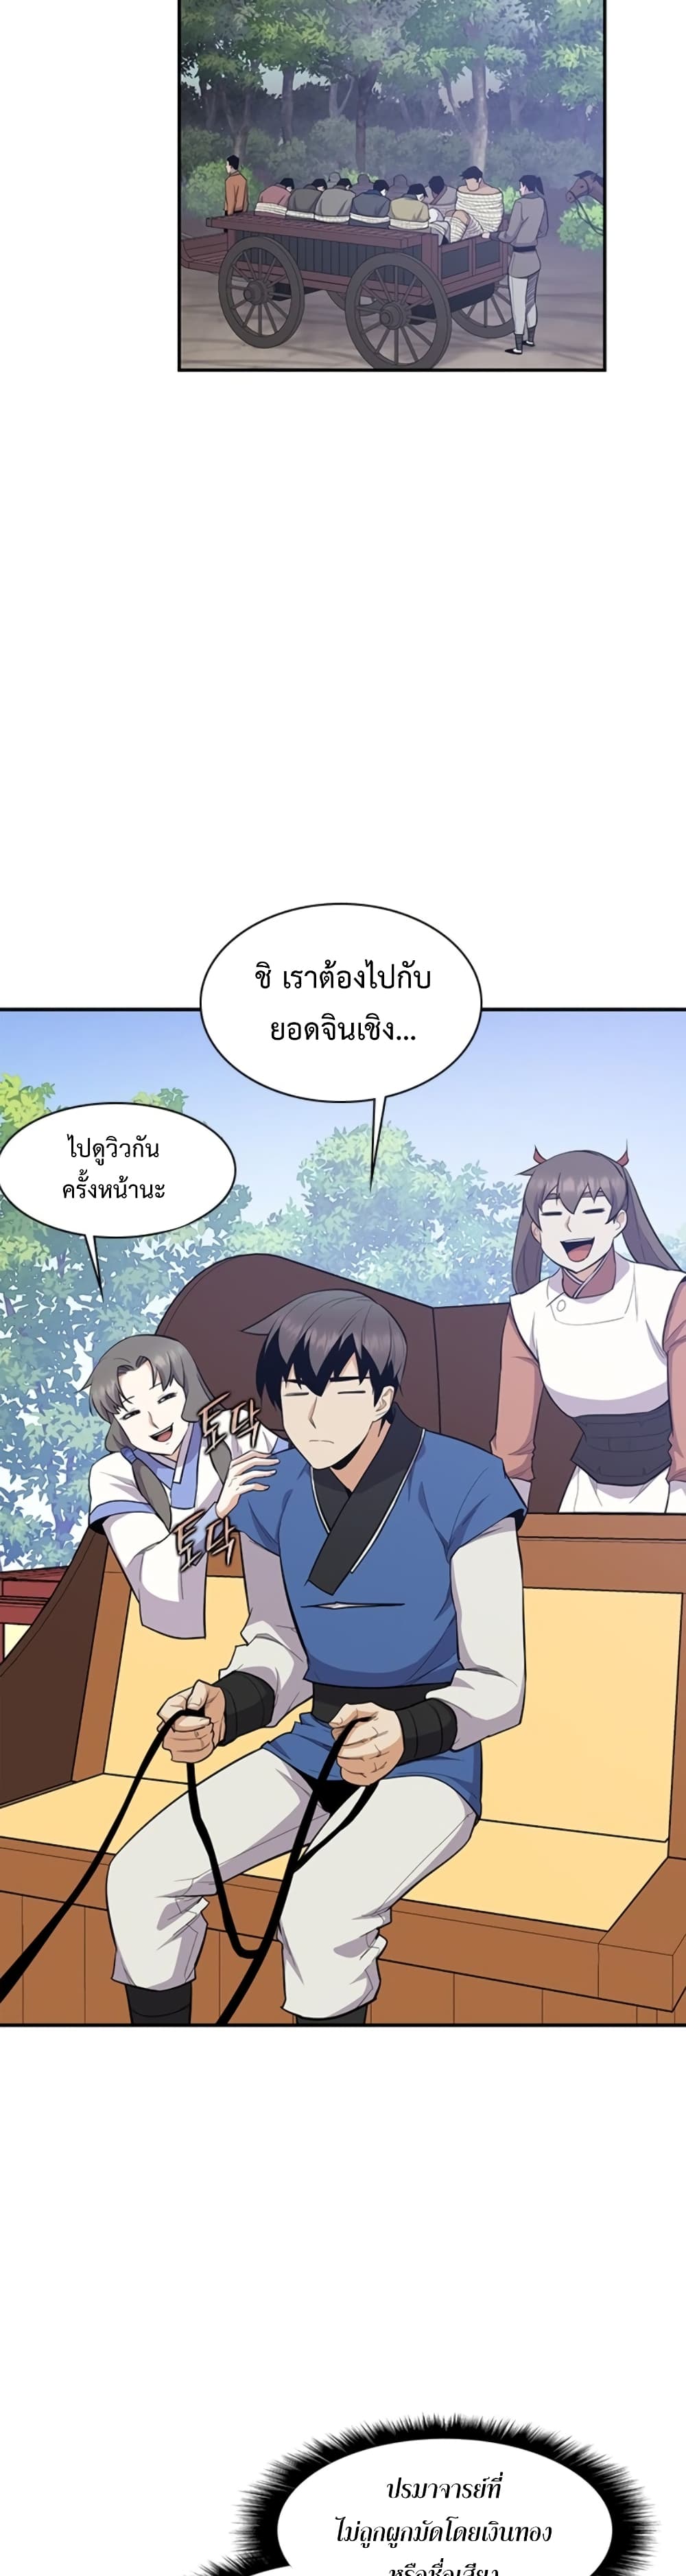 The Strongest Ever à¸à¸­à¸à¸à¸µà¹ 33 (8)